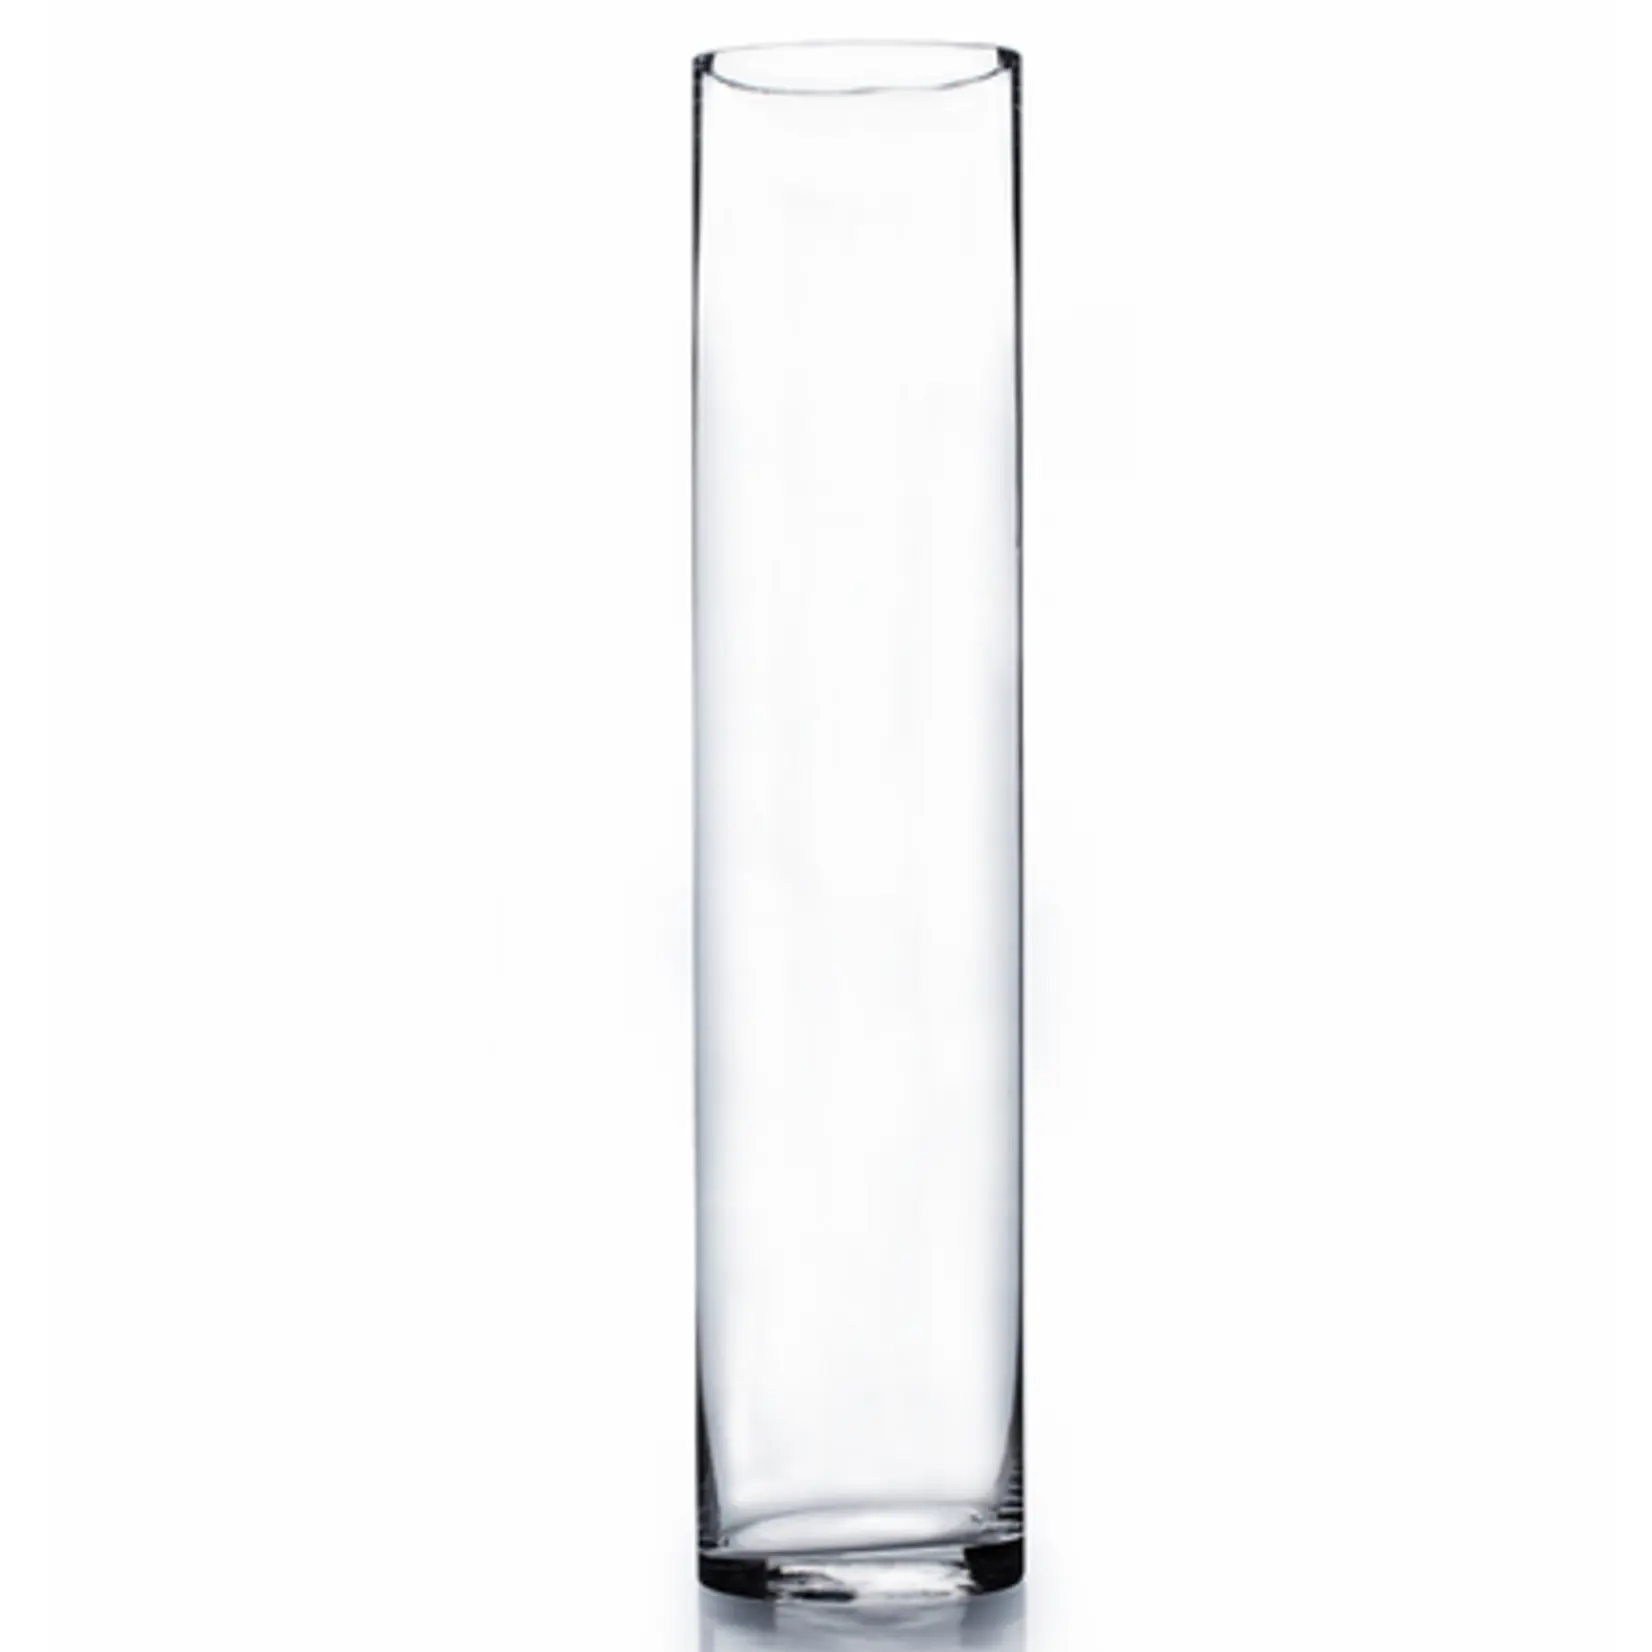 Clear Tall Cylinder Glass Floor Vase For Home/Decor Crystal Vases For Flower Vase Set 3 /Thin Glass Vases as Centrepiece Round